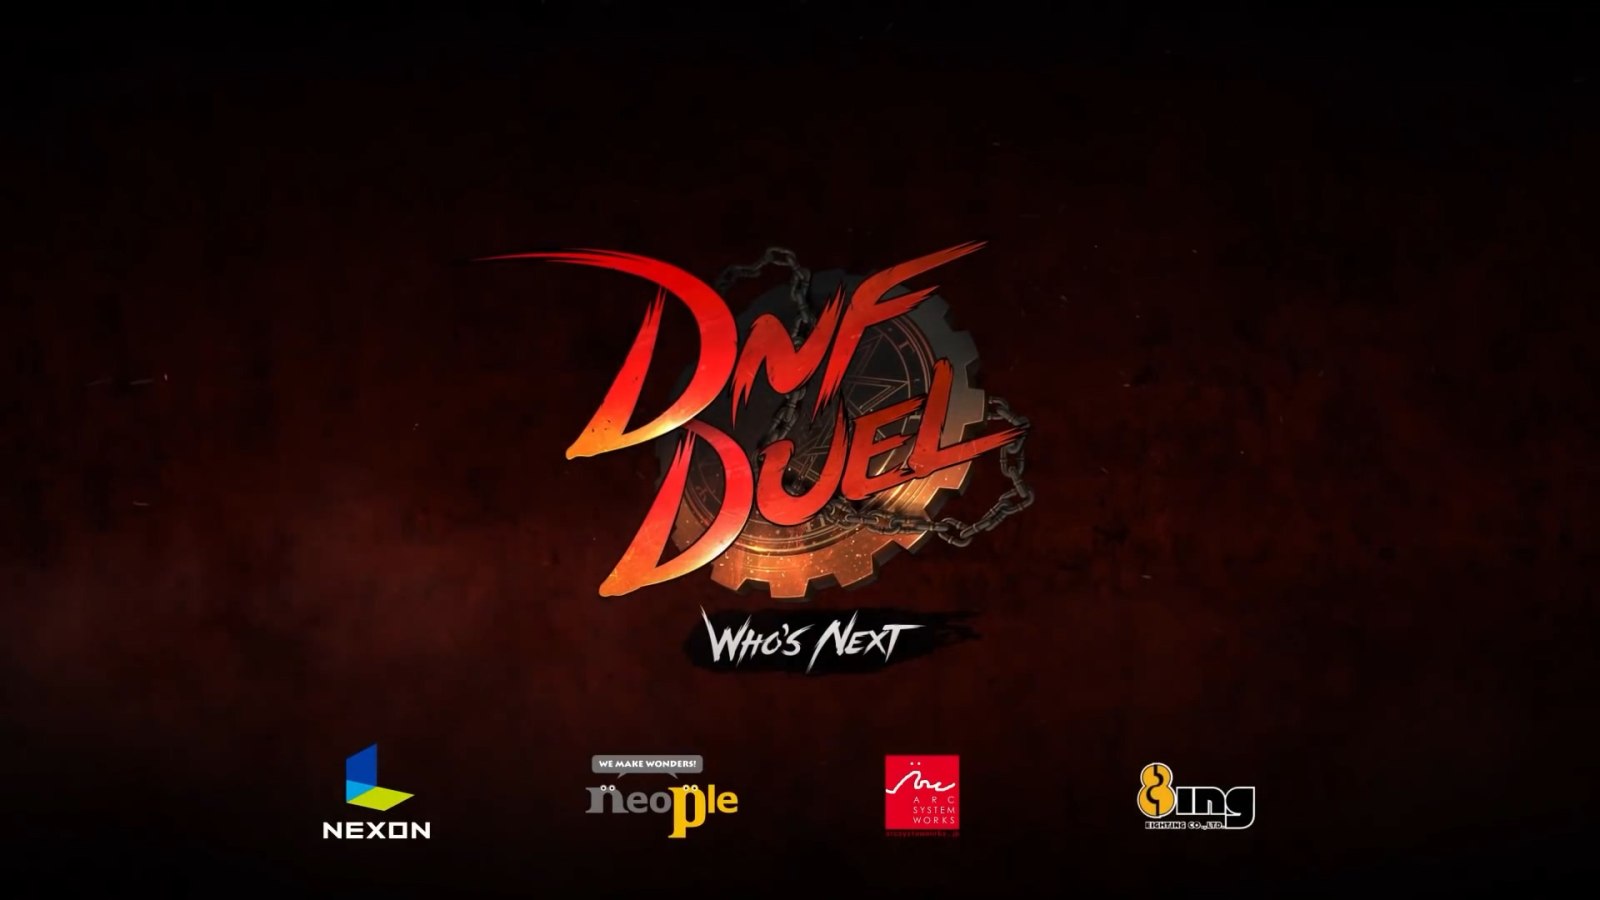 《DNF DUEL》新人物宣传片“剑影”公布